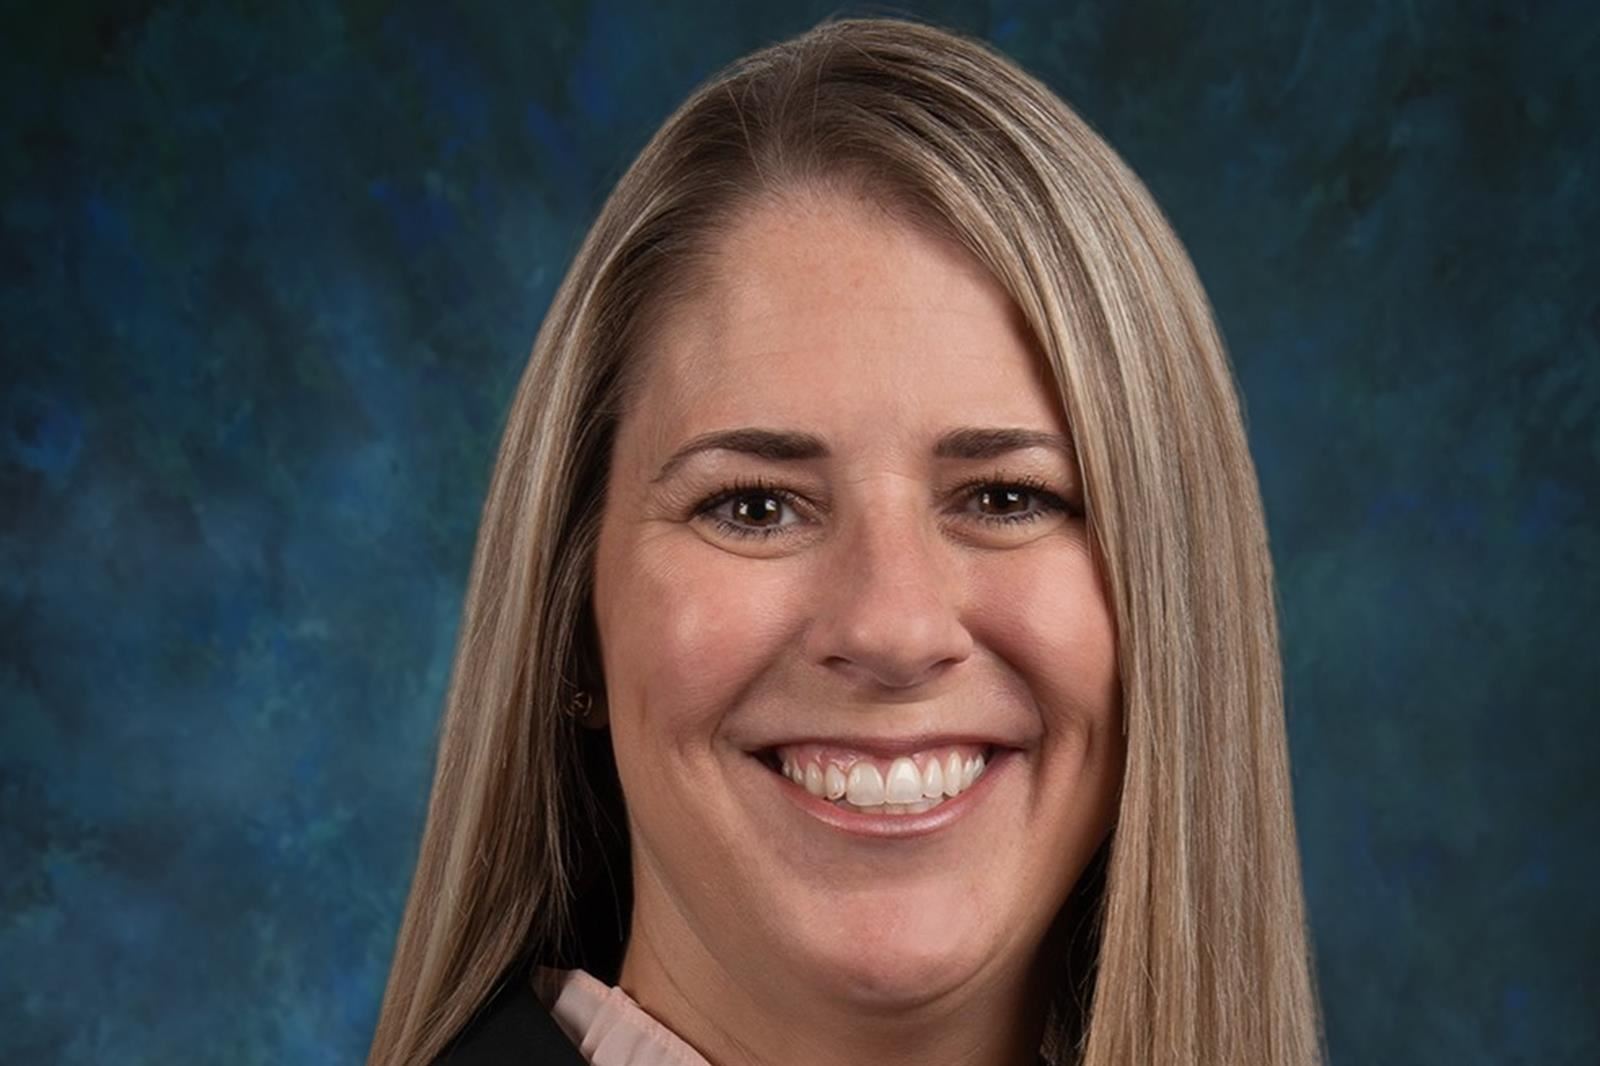 Stefanie Berger, assistant principal at Copeland Elementary School, was named the principal.